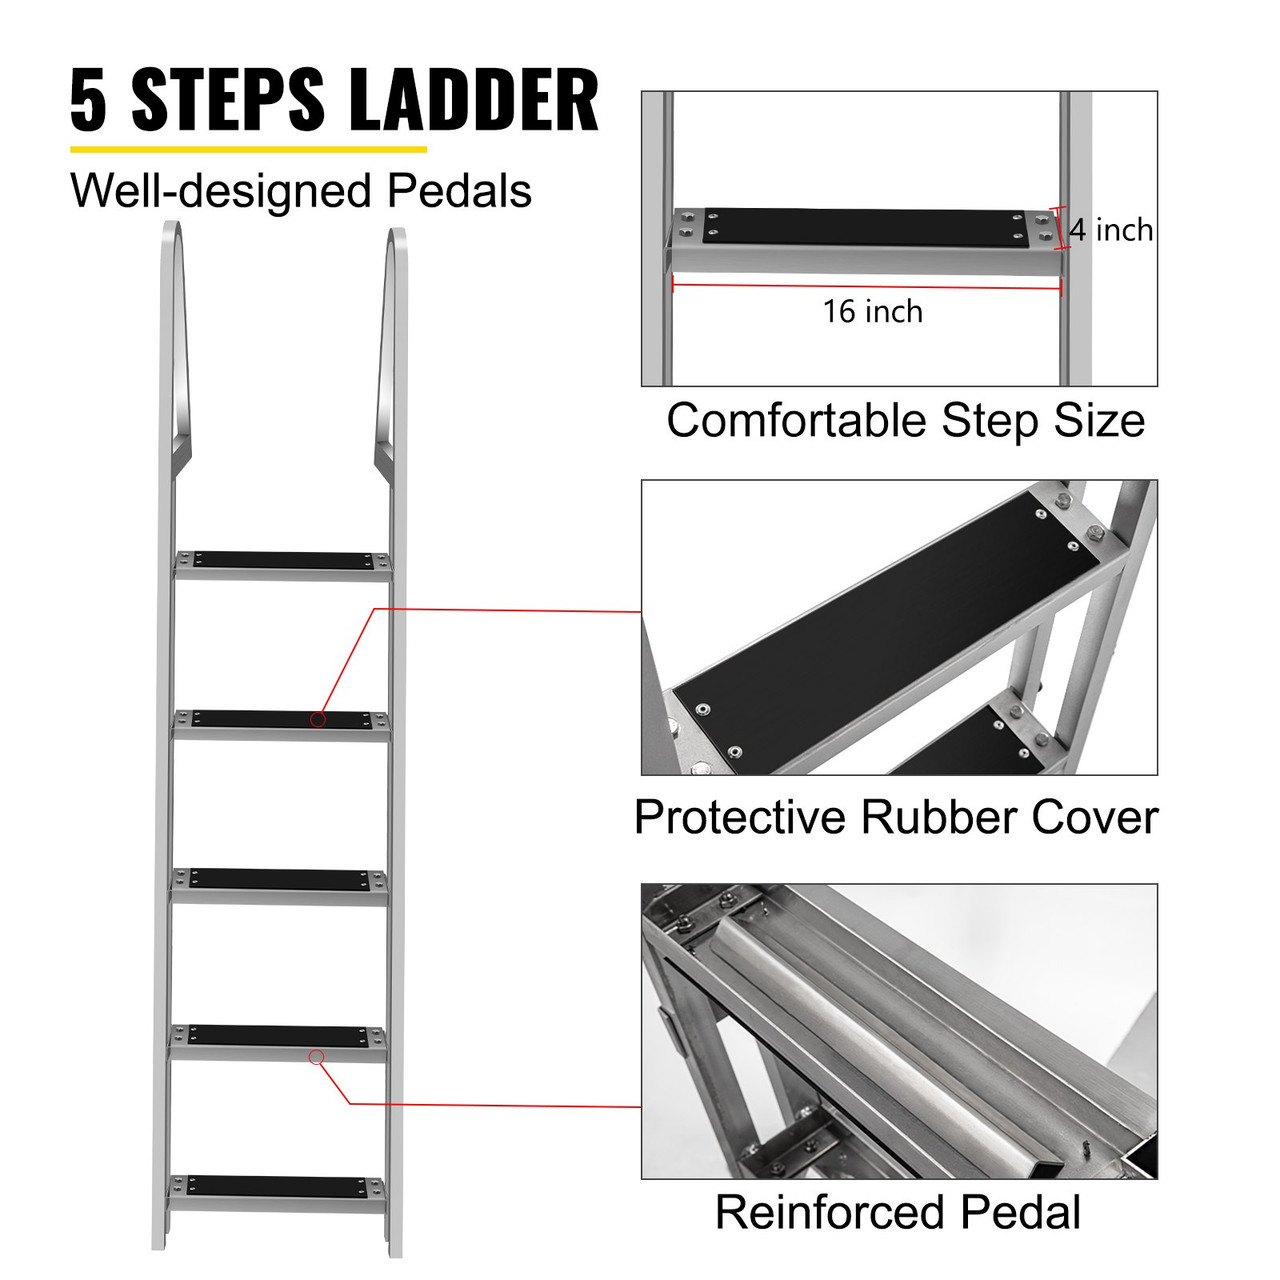 Removable Dock Ladder with Rubber Mat, Pontoon Boat Ladder with Mounting Hardware, Swim Ladder Aluminum 5 Step, Each Step 16" x 4", 350Lbs Load, for Lake, Marine Boarding, Pool